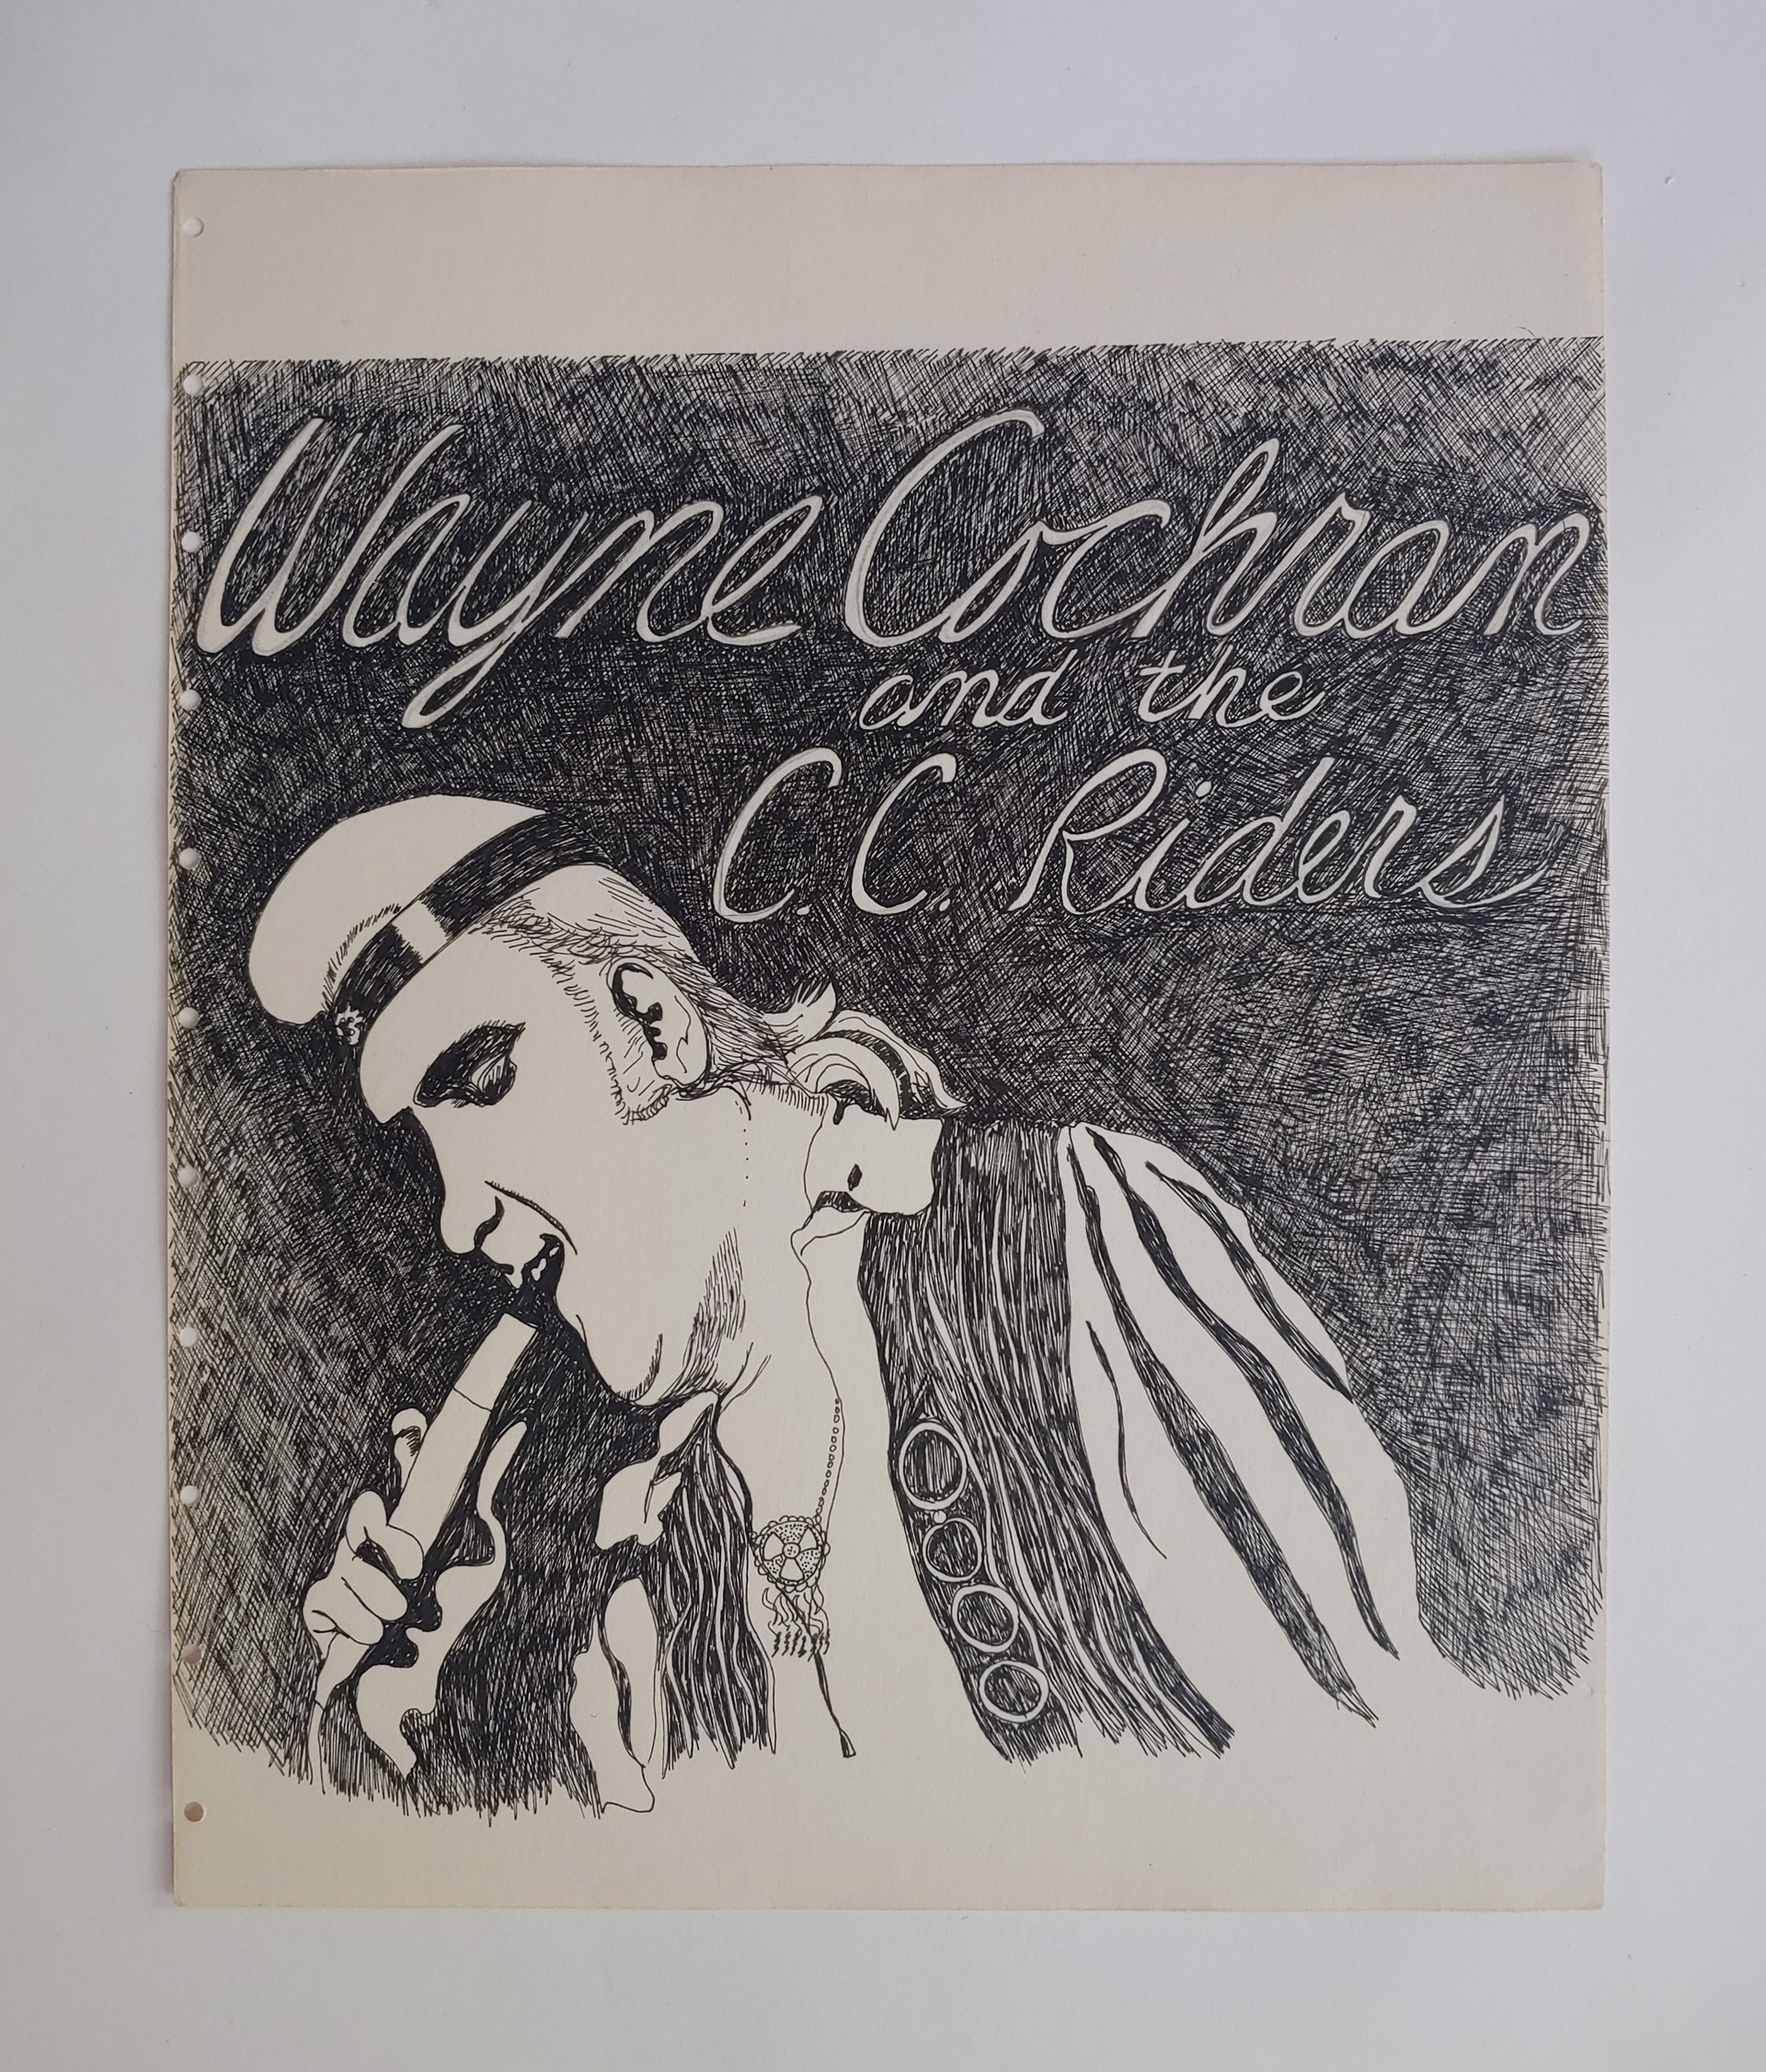 Wayne Cochran and the C.C. Riders - Drawing for Poster by David Amdur